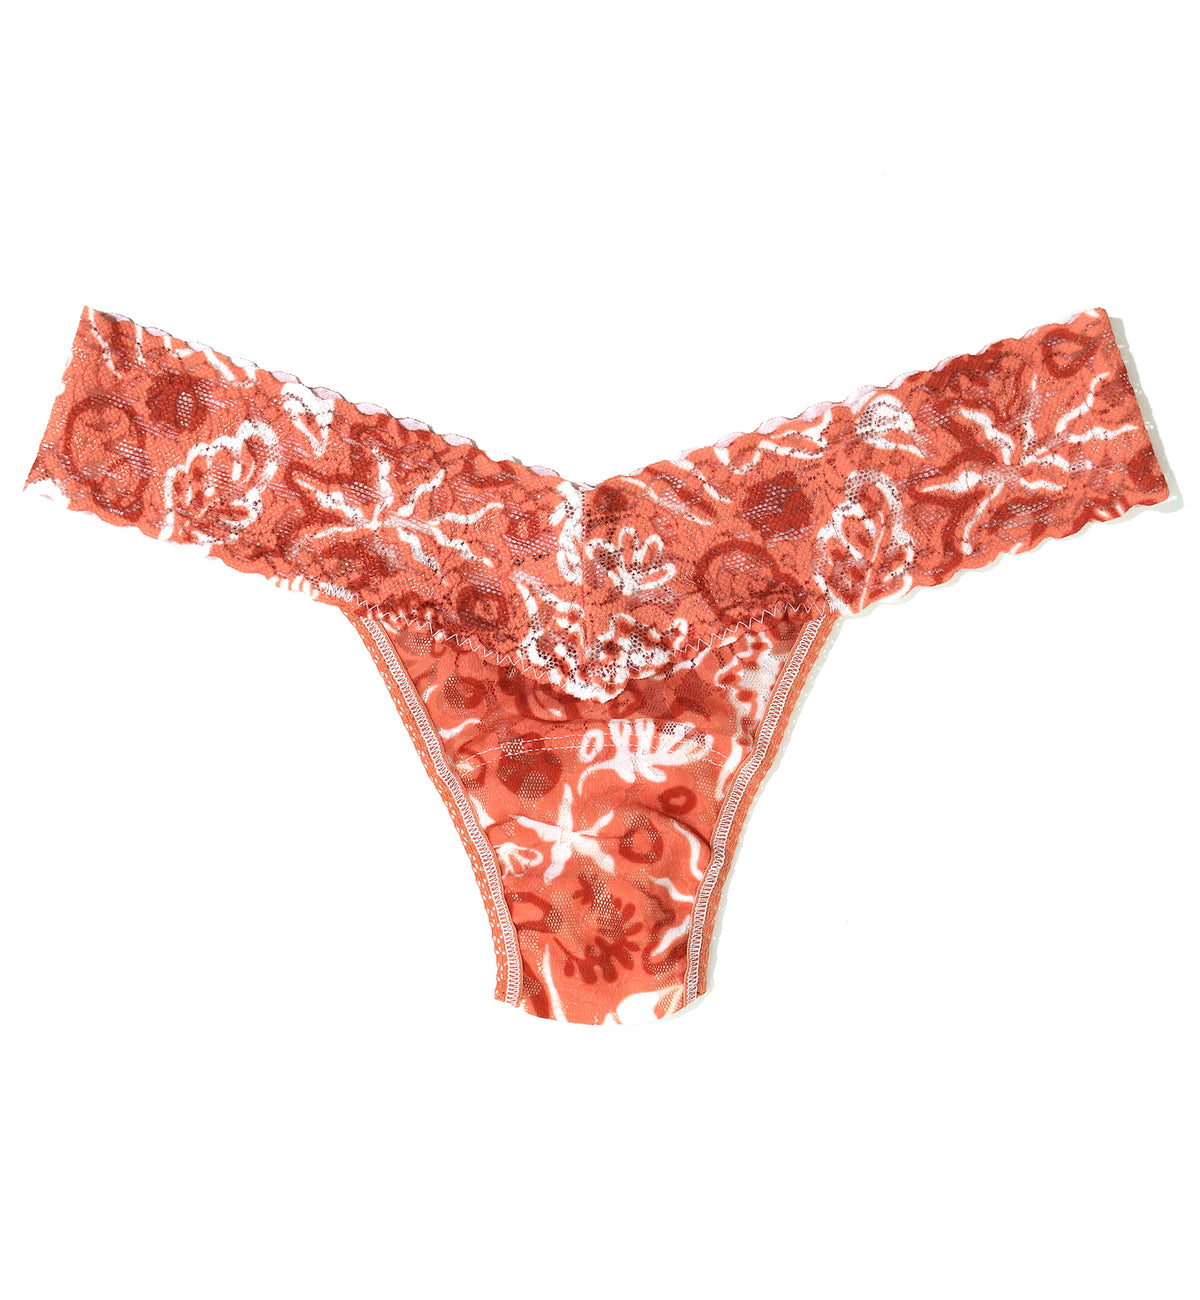 Hanky Panky Signature Lace Printed Low Rise Thong (PR4911P),Sea Finds - Sea Finds,One Size